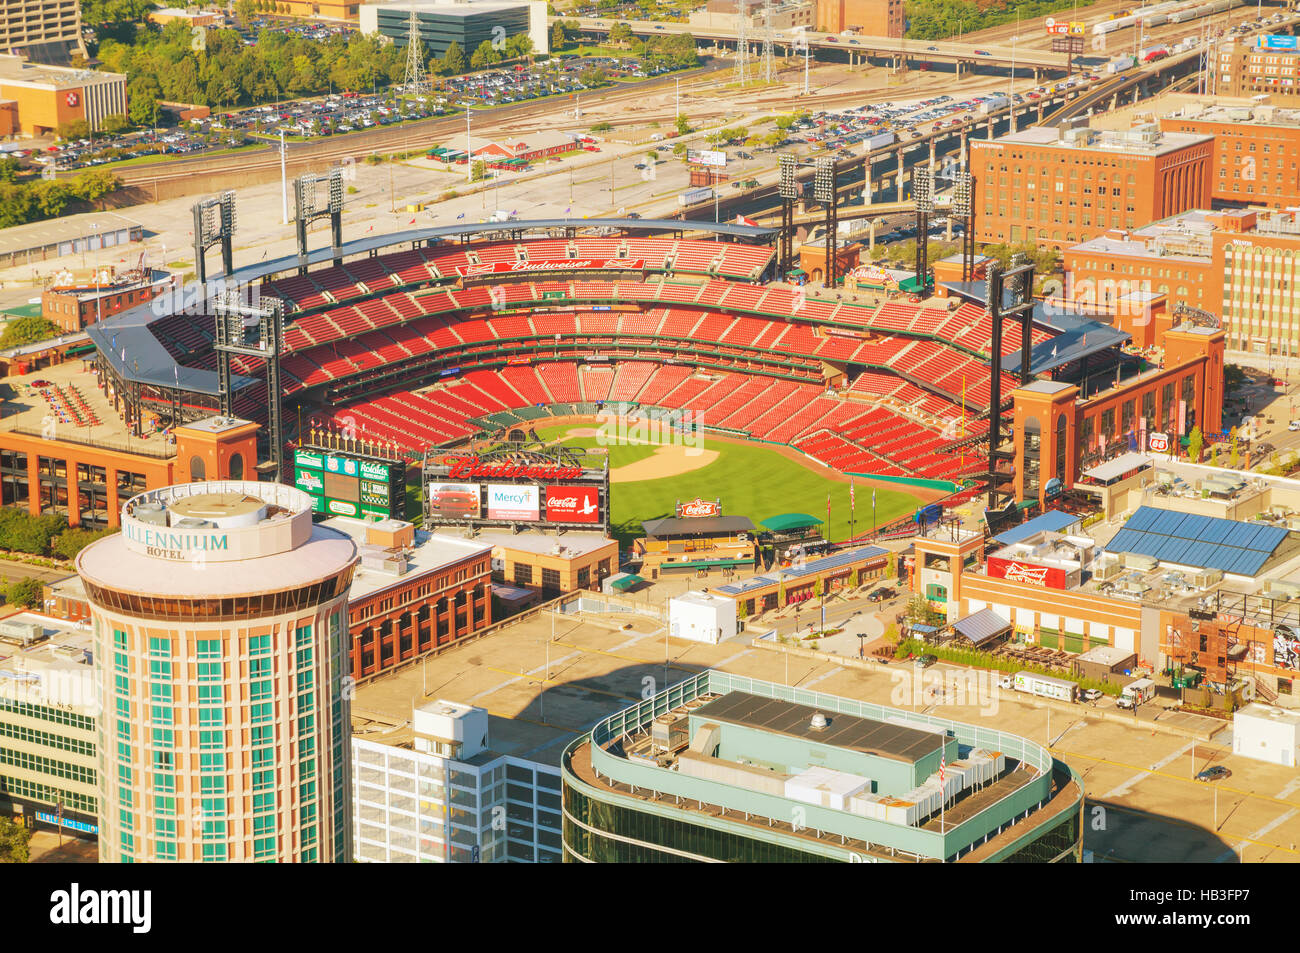 Busch-Baseball-Stadion in St. Louis, MO Stockfoto